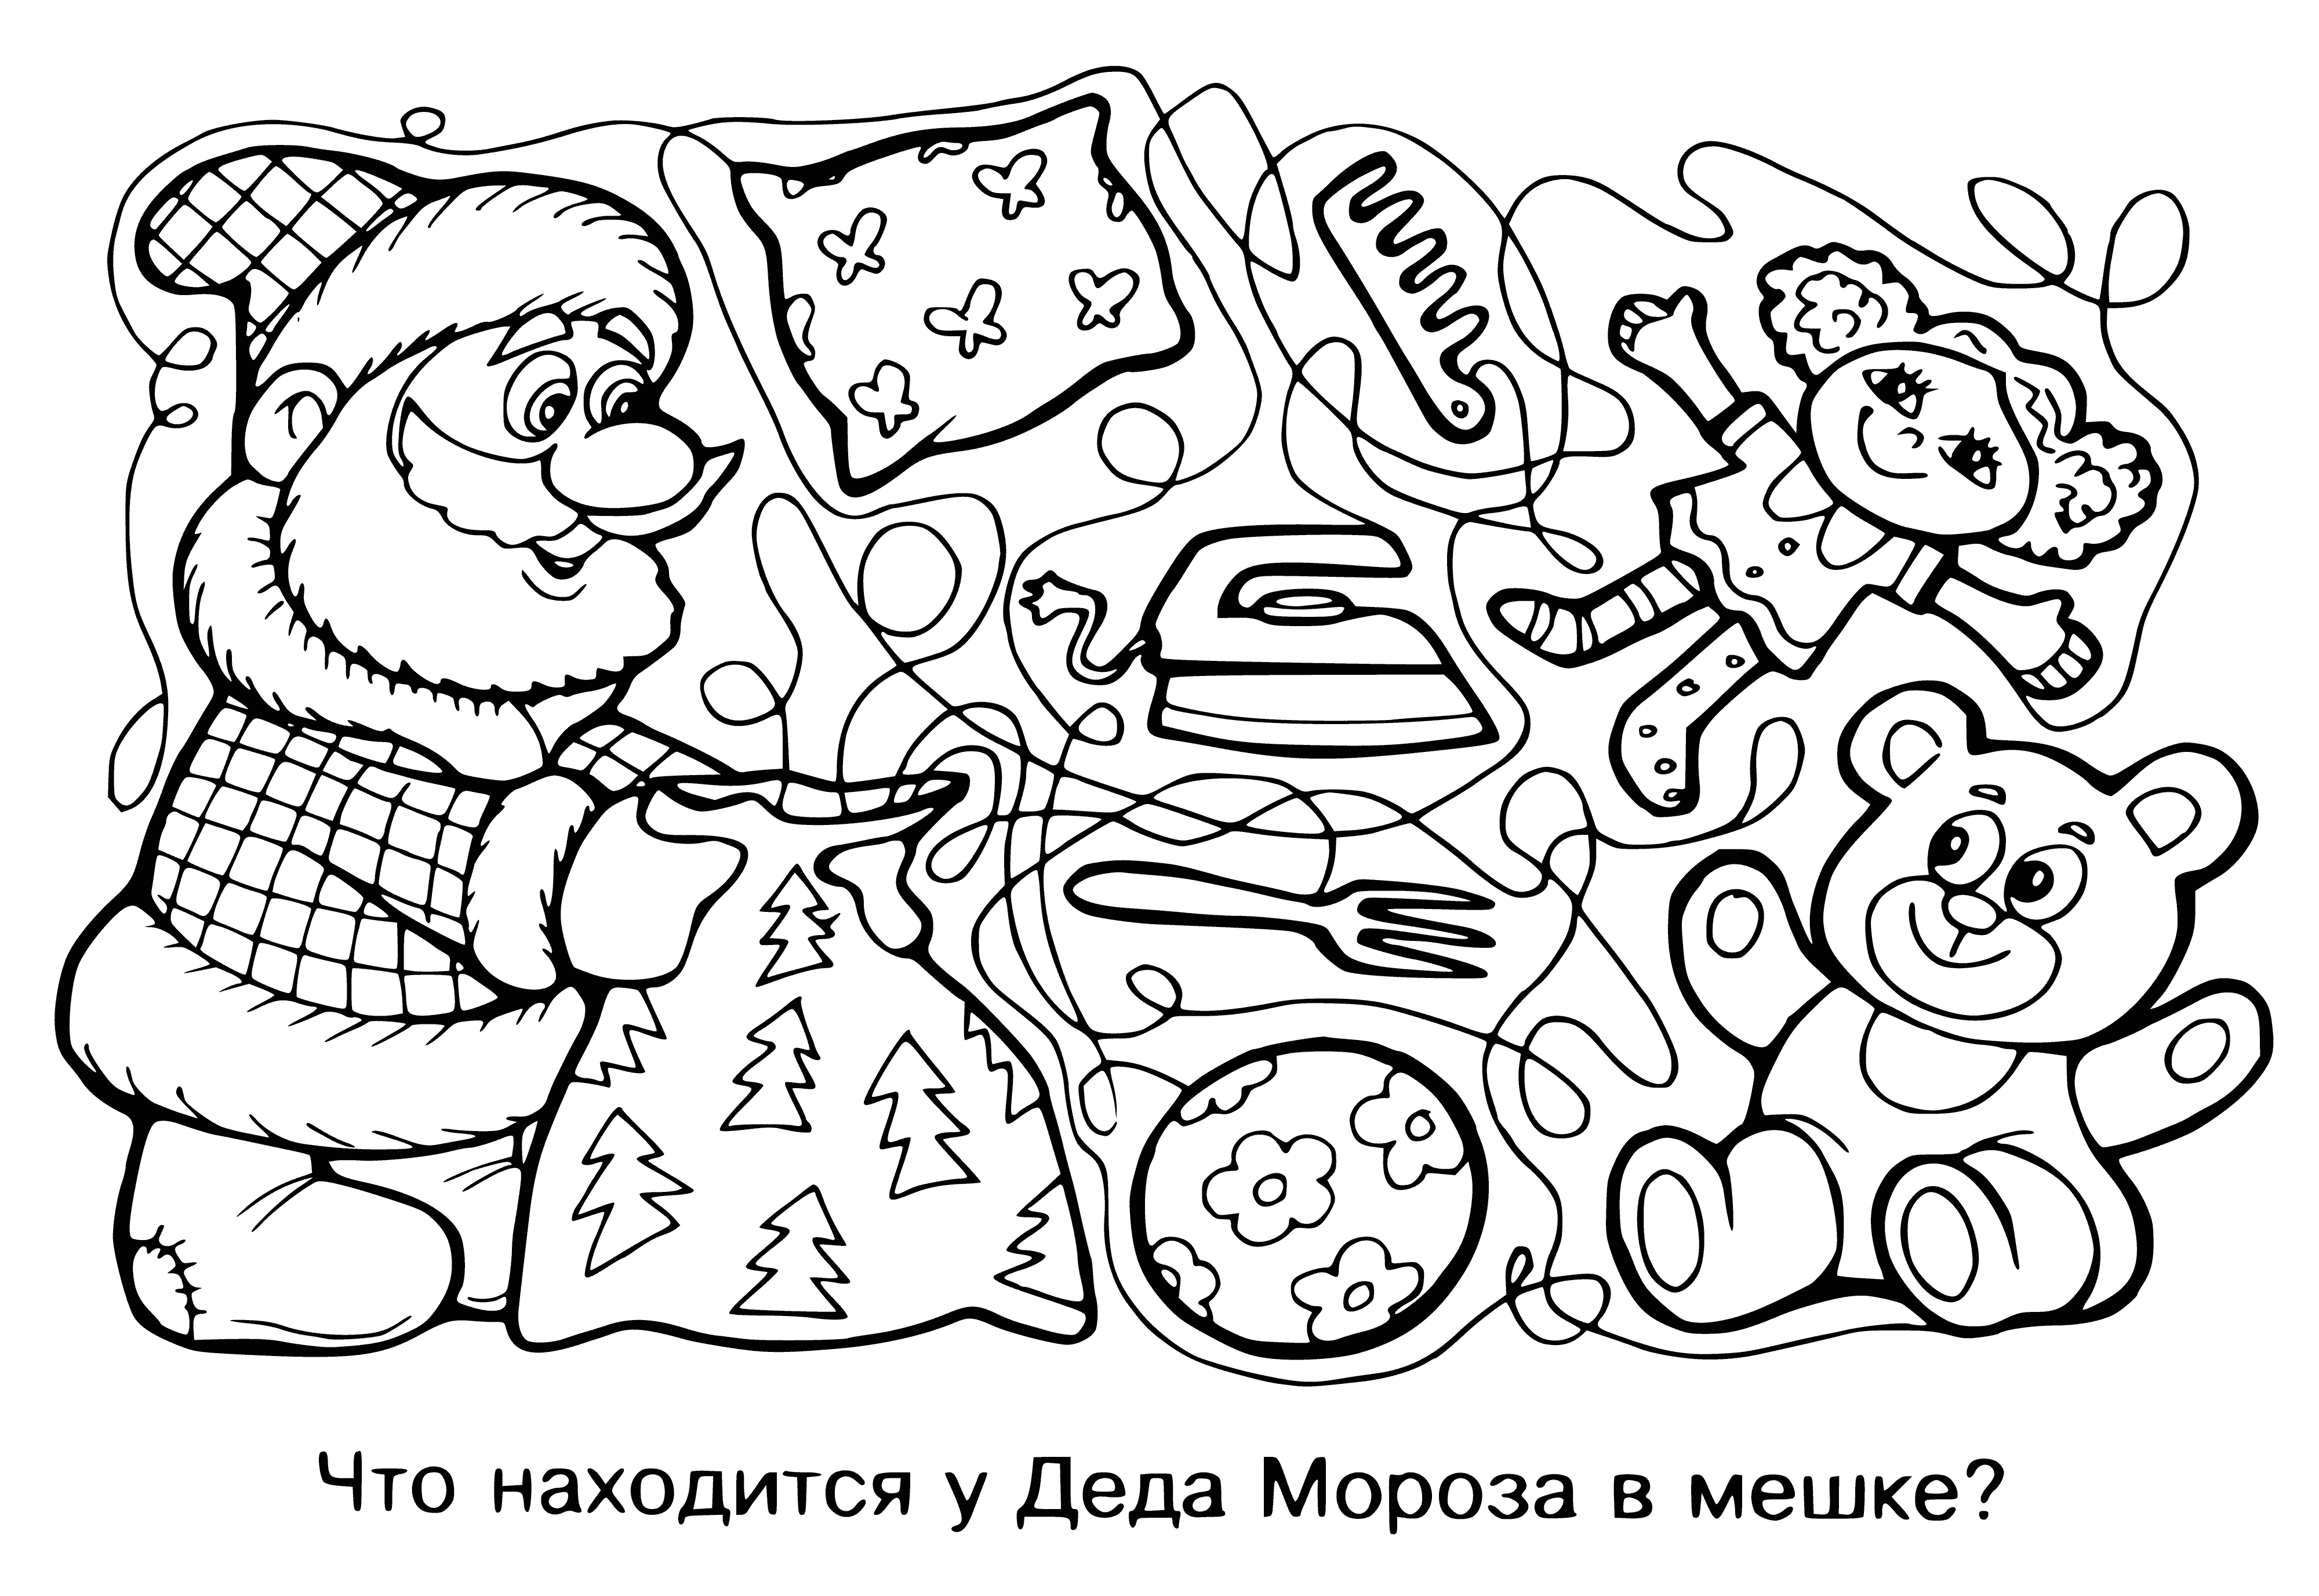 coloring page: Santa Claus holds a bag full of presents in the coloring page. #ChristmasFun